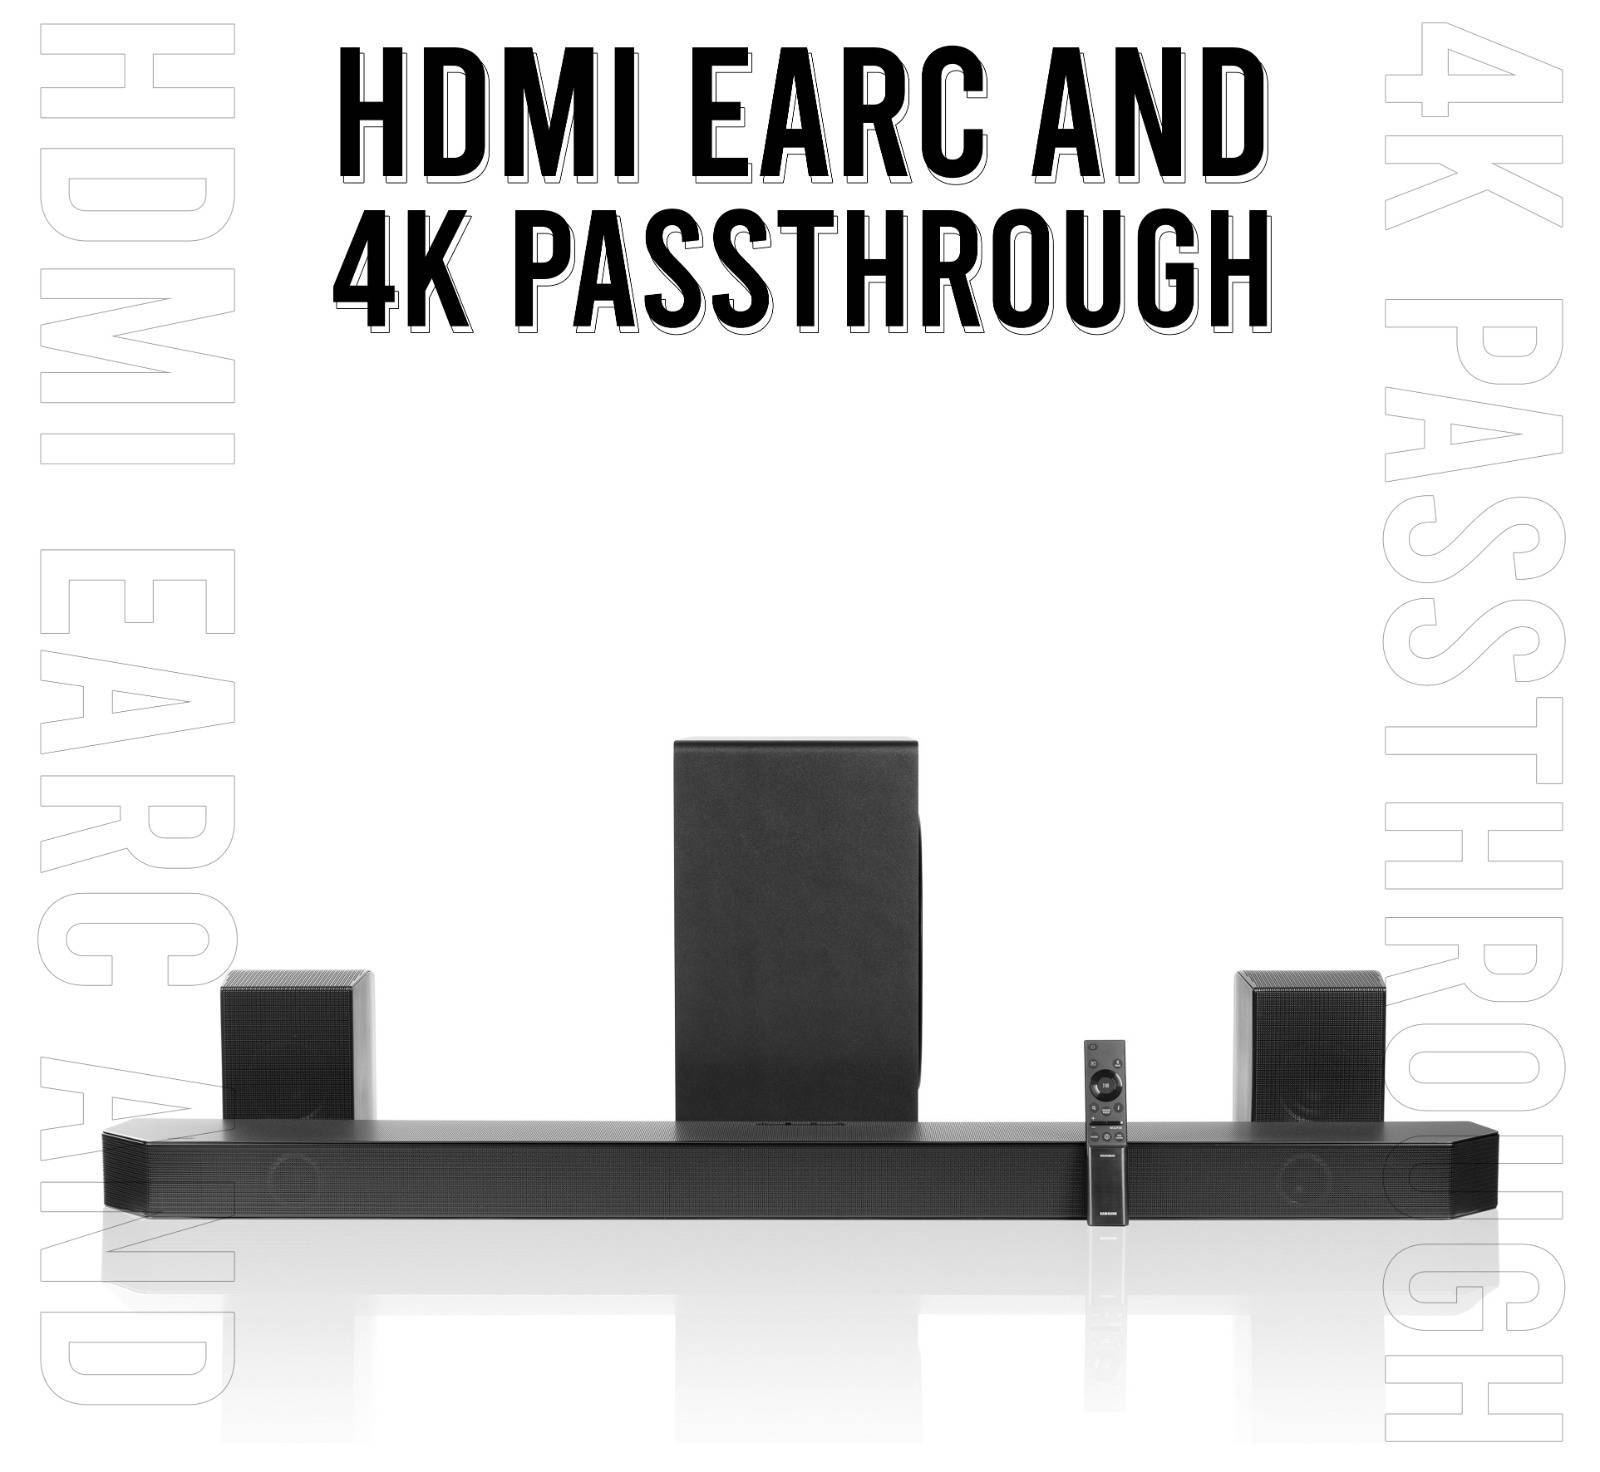 HDMI eARC and 4K Passthrough